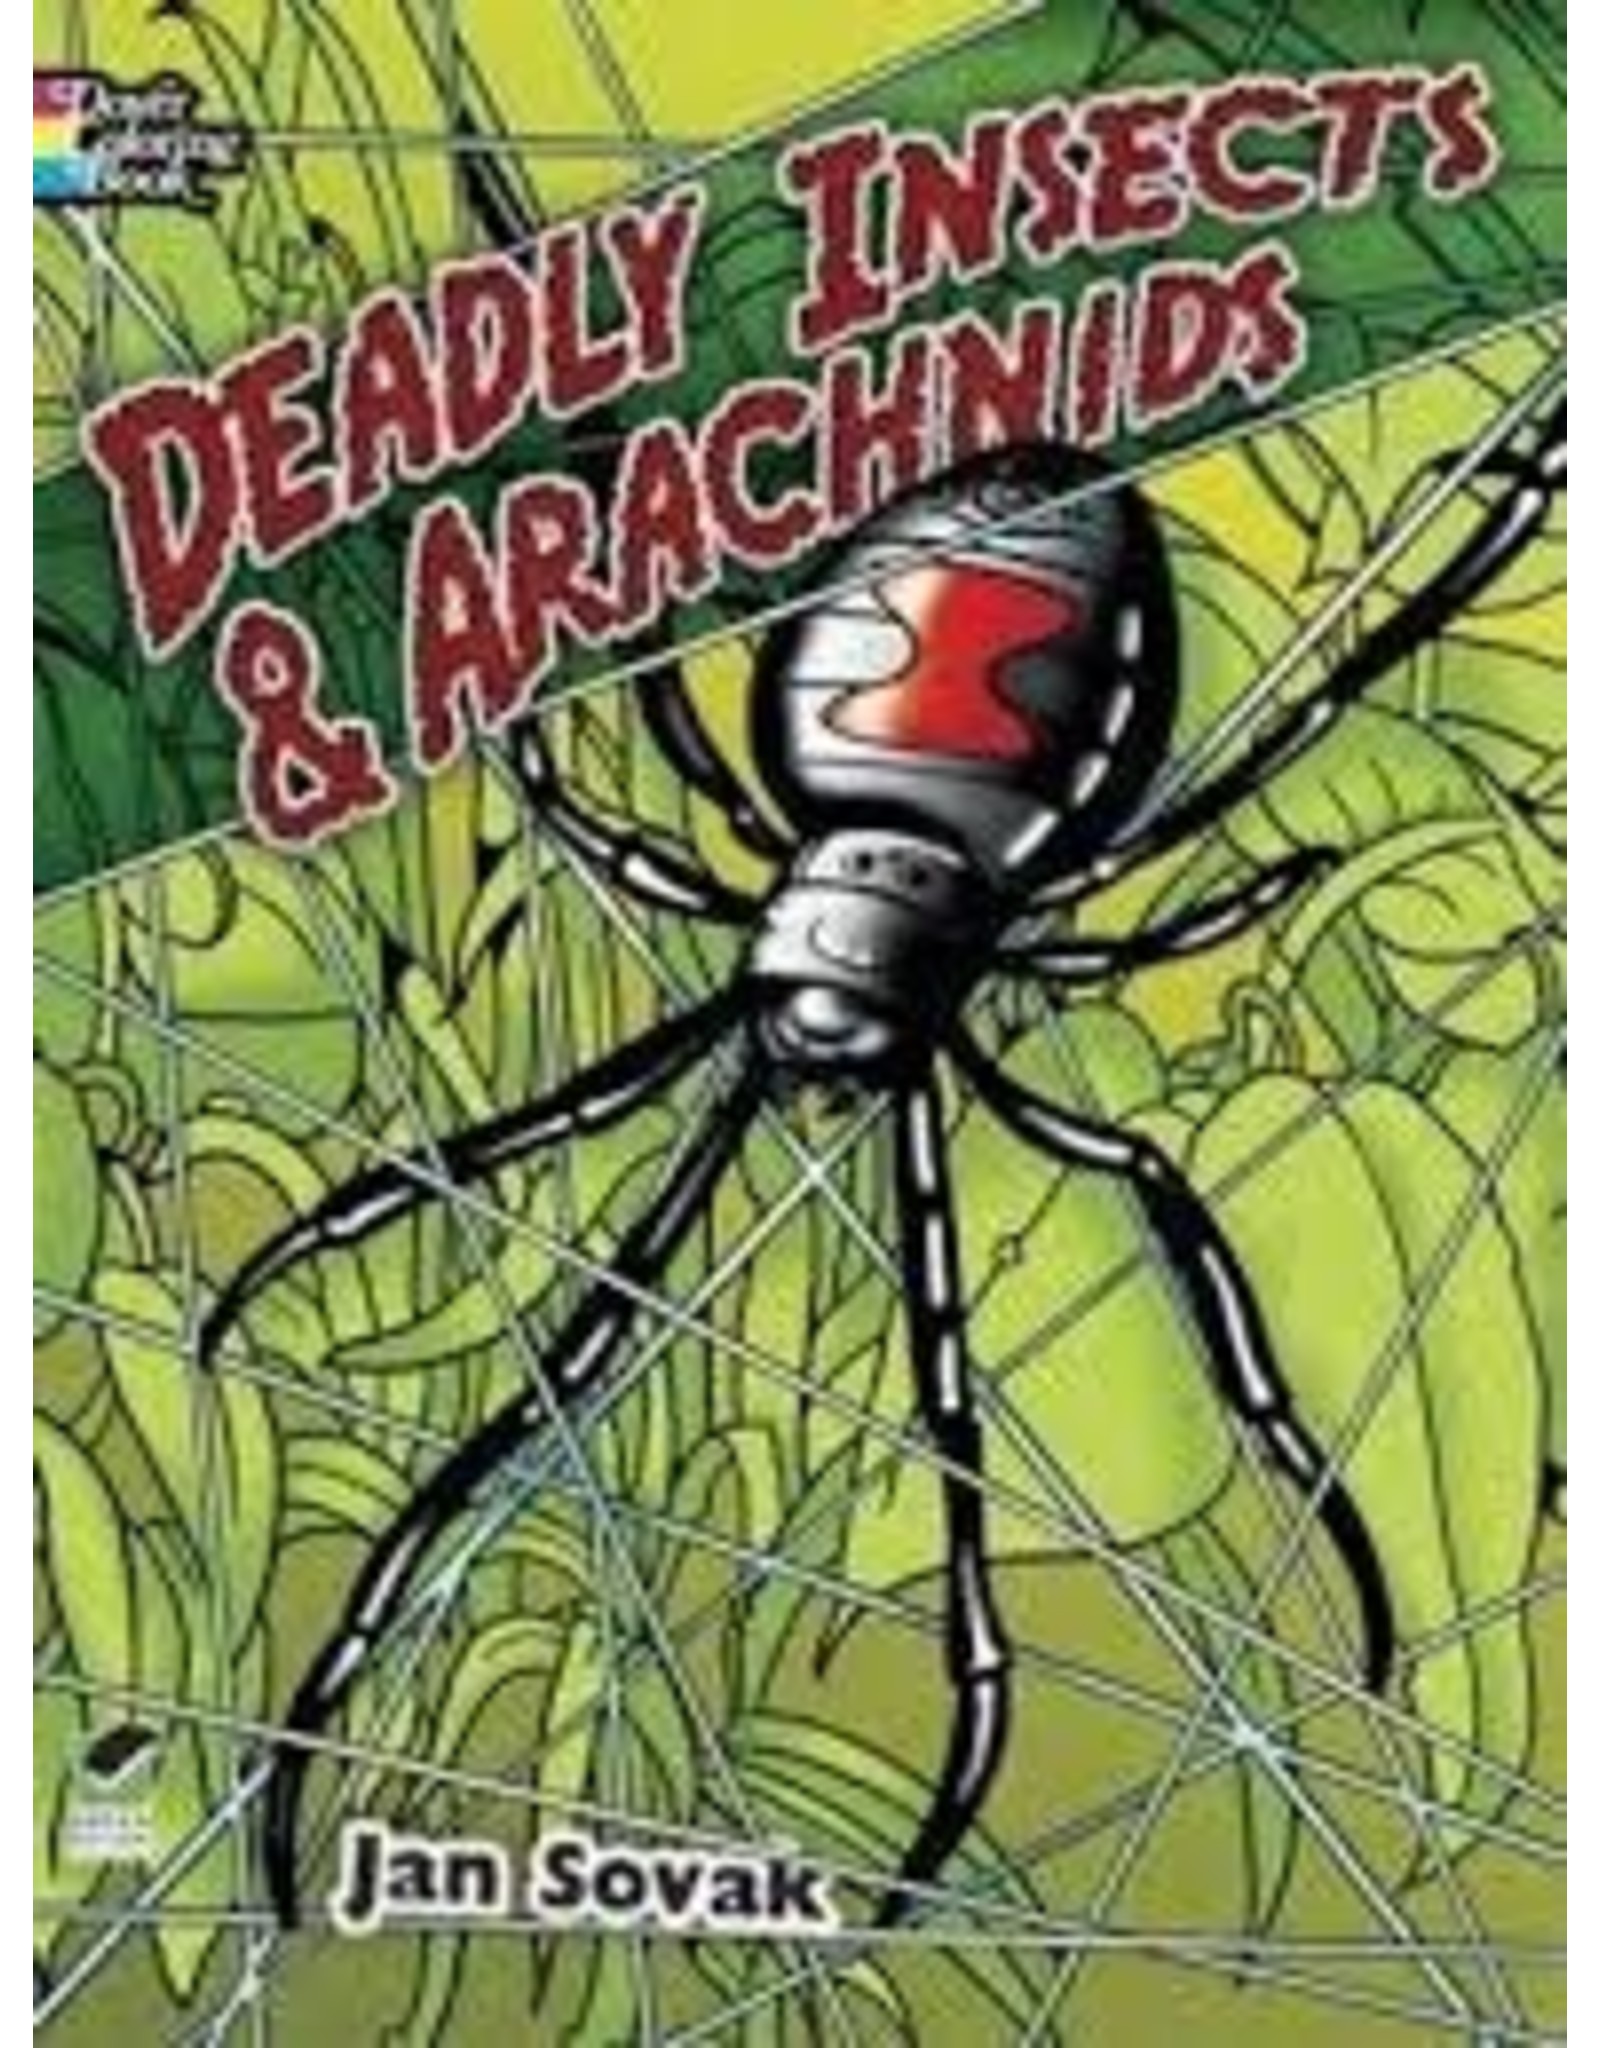 Deadly Insects and Arachnids - Jan Sovak